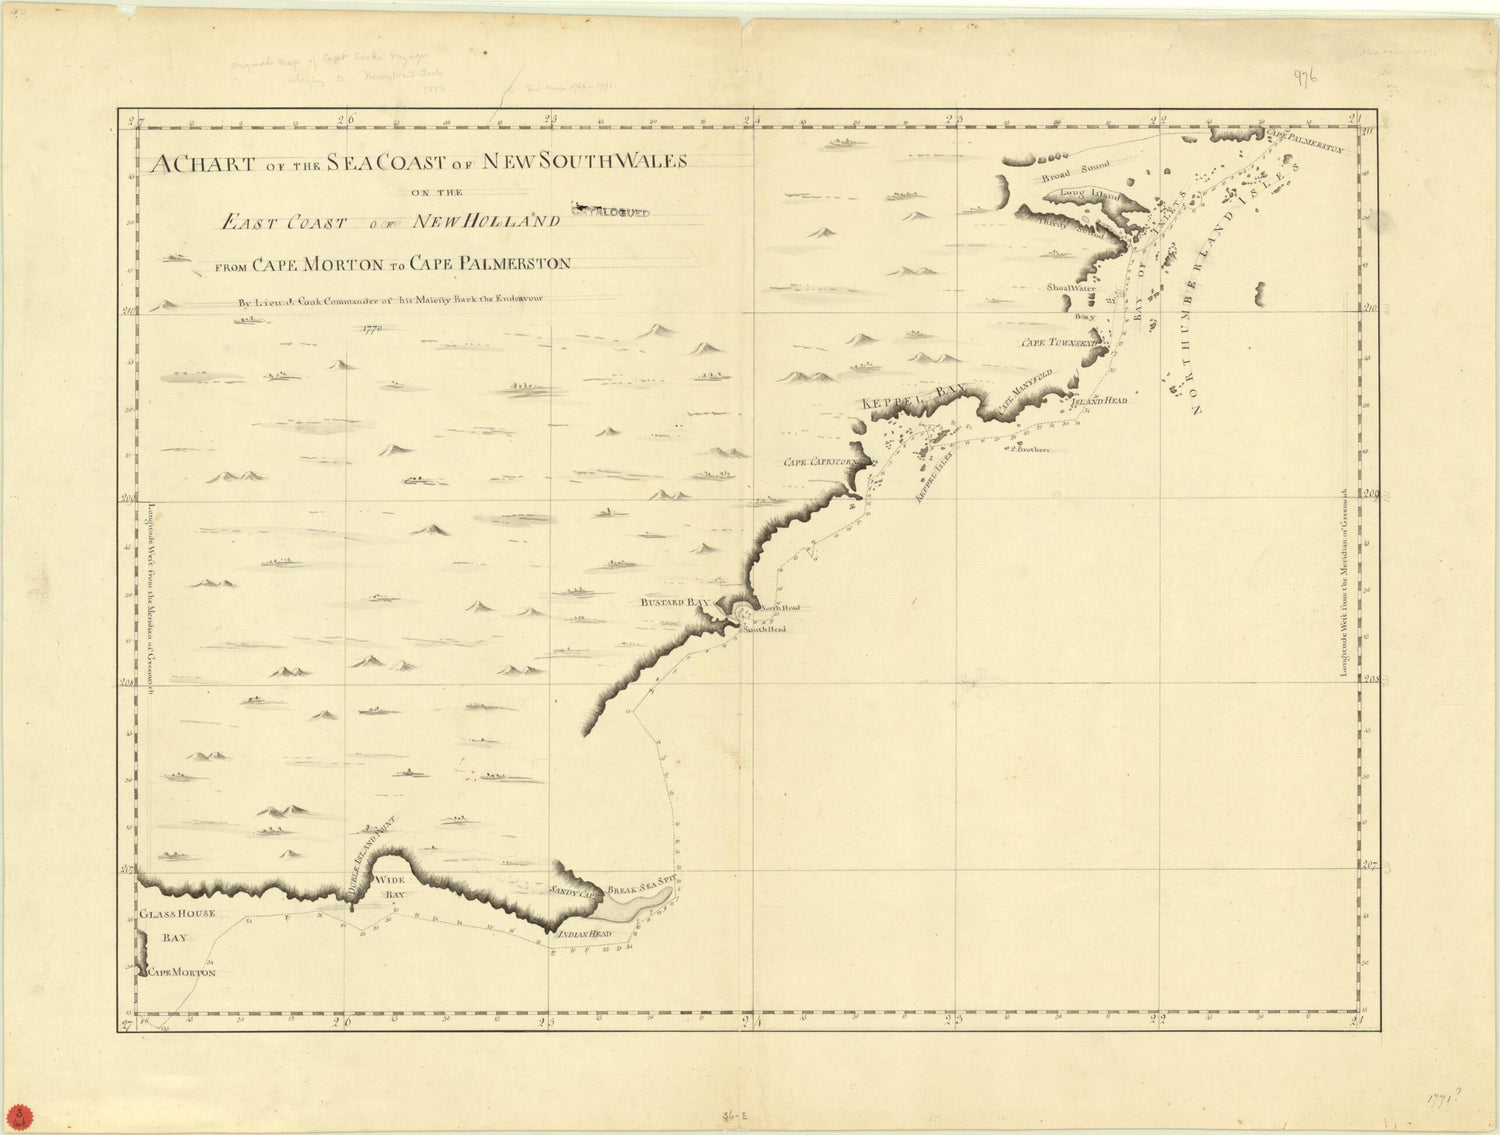 This old map of A Chart of Part of the Sea Coast of New South Wales On the East Coast of New Holland from Cape Morton to Cape Palmerston from 1771 was created by James Cook in 1771